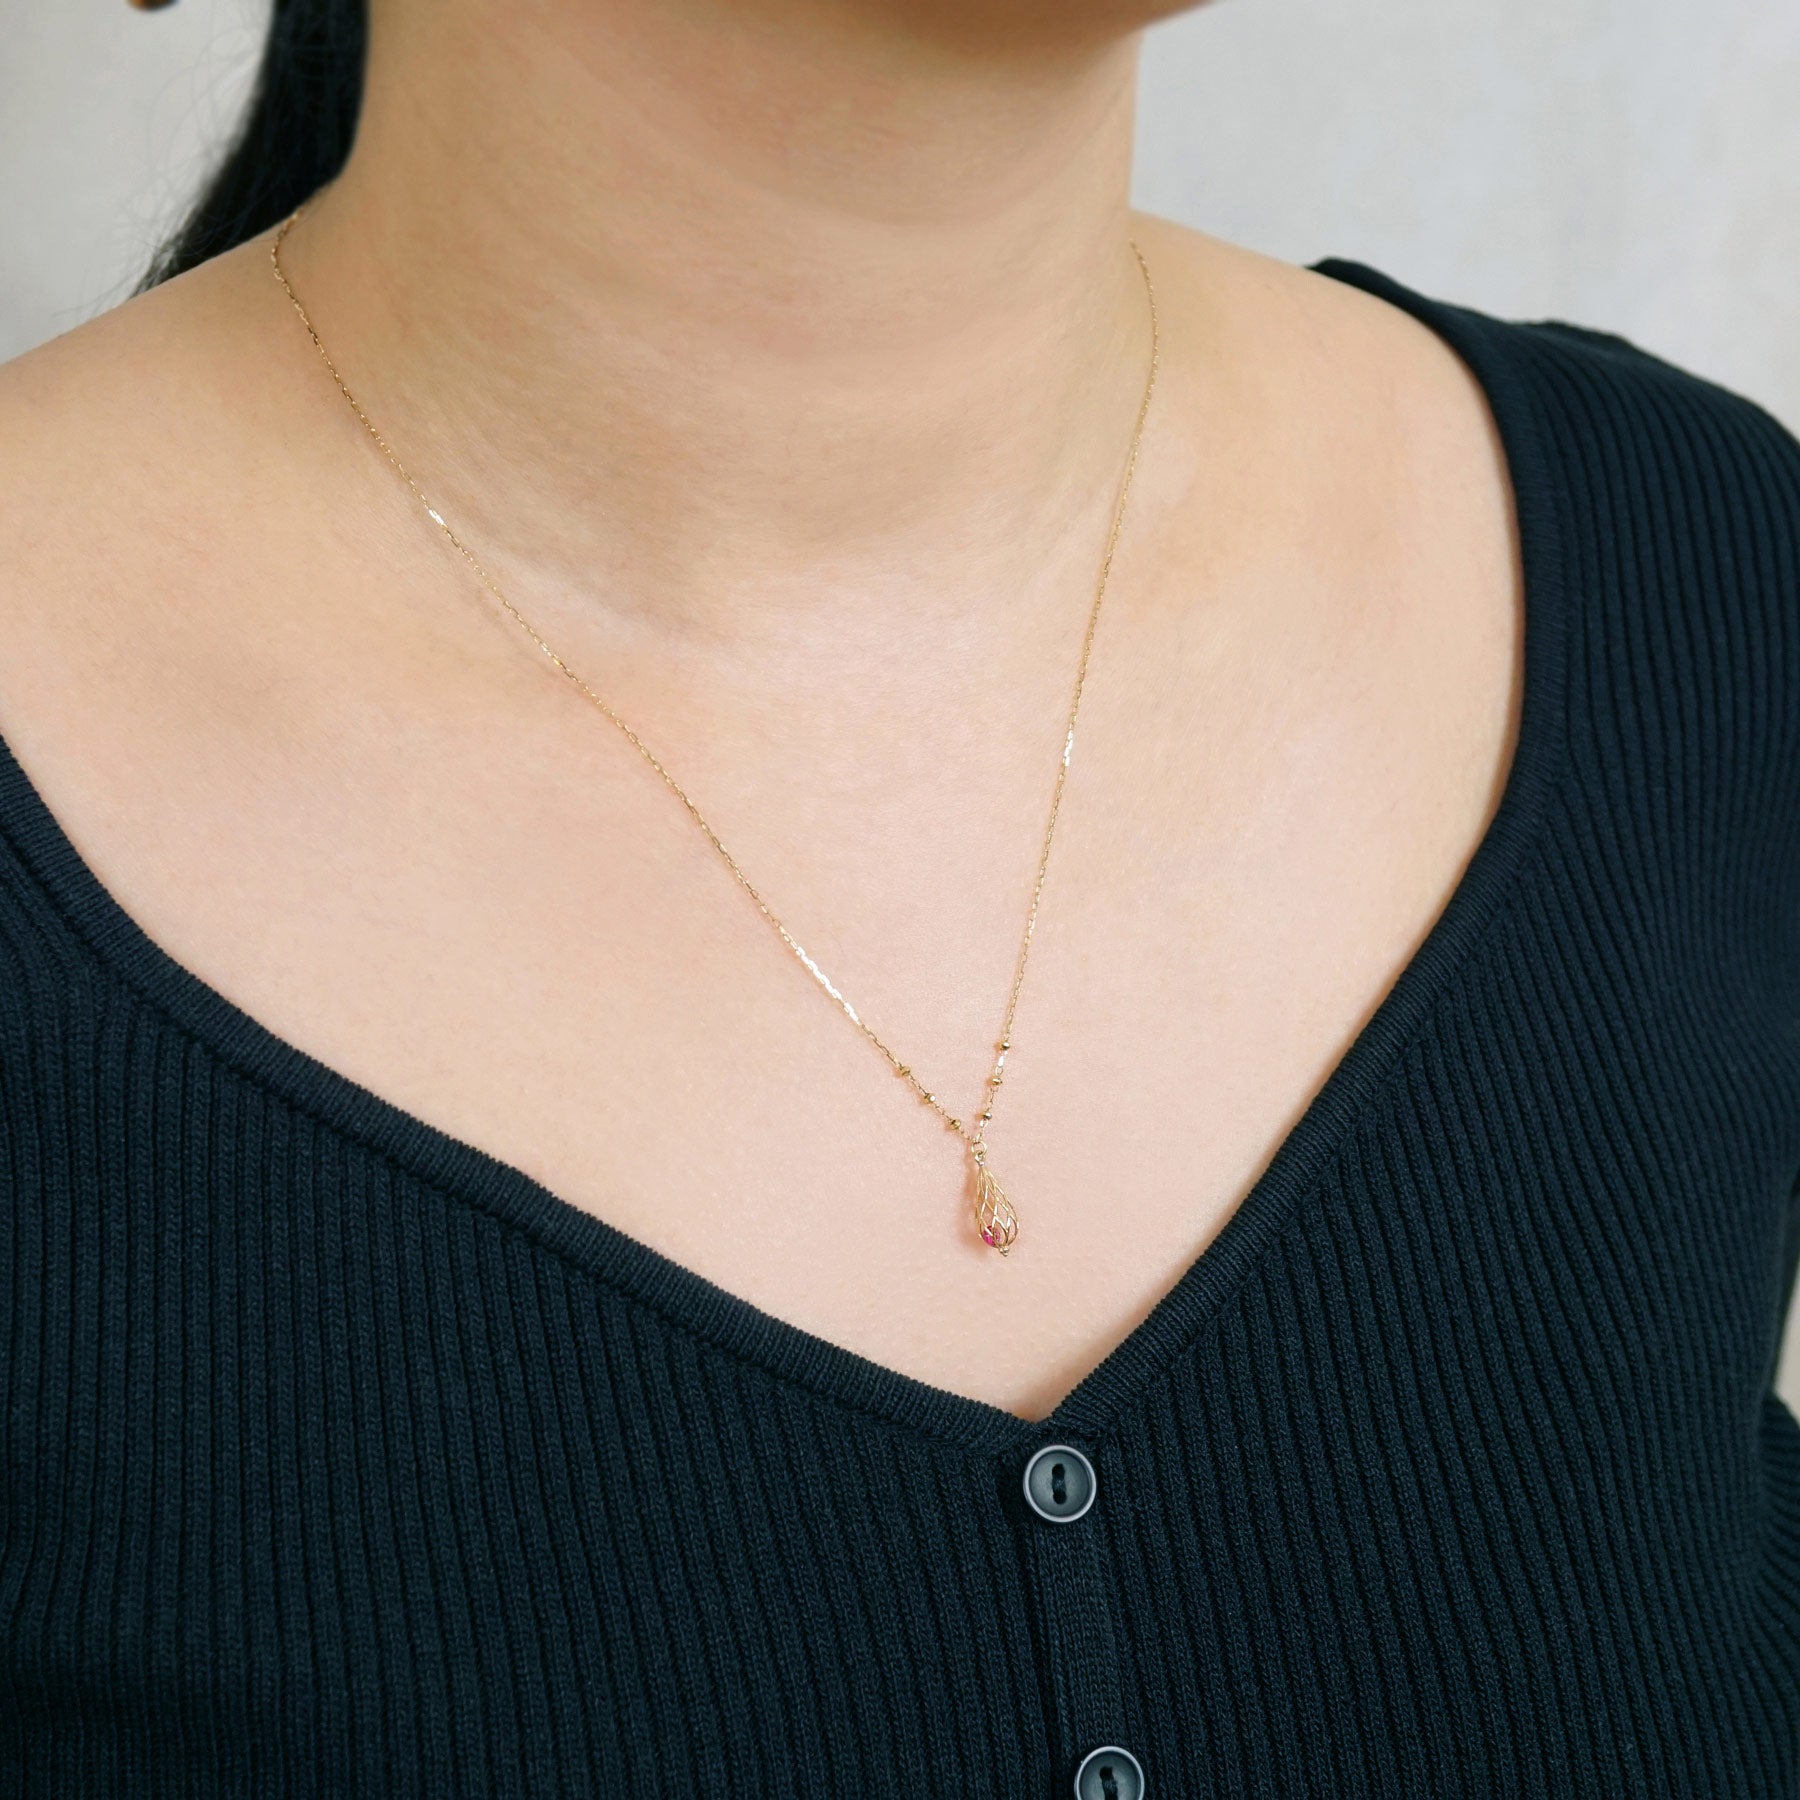 [Pannier] 10K Chandelier Necklace (Yellow Gold) - Model Image